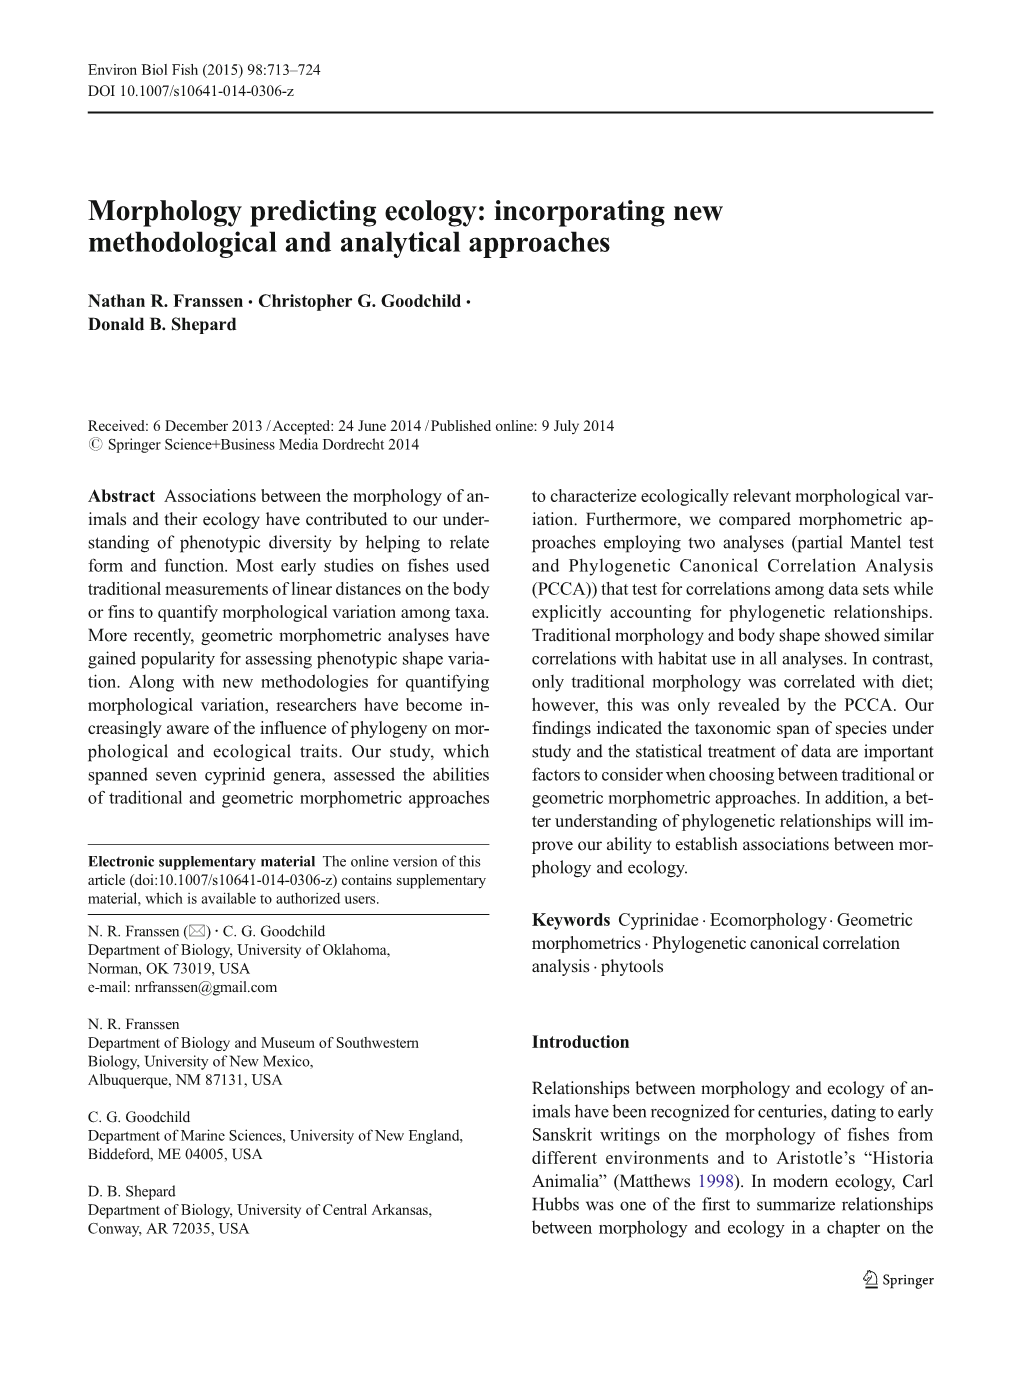 Morphology Predicting Ecology: Incorporating New Methodological and Analytical Approaches